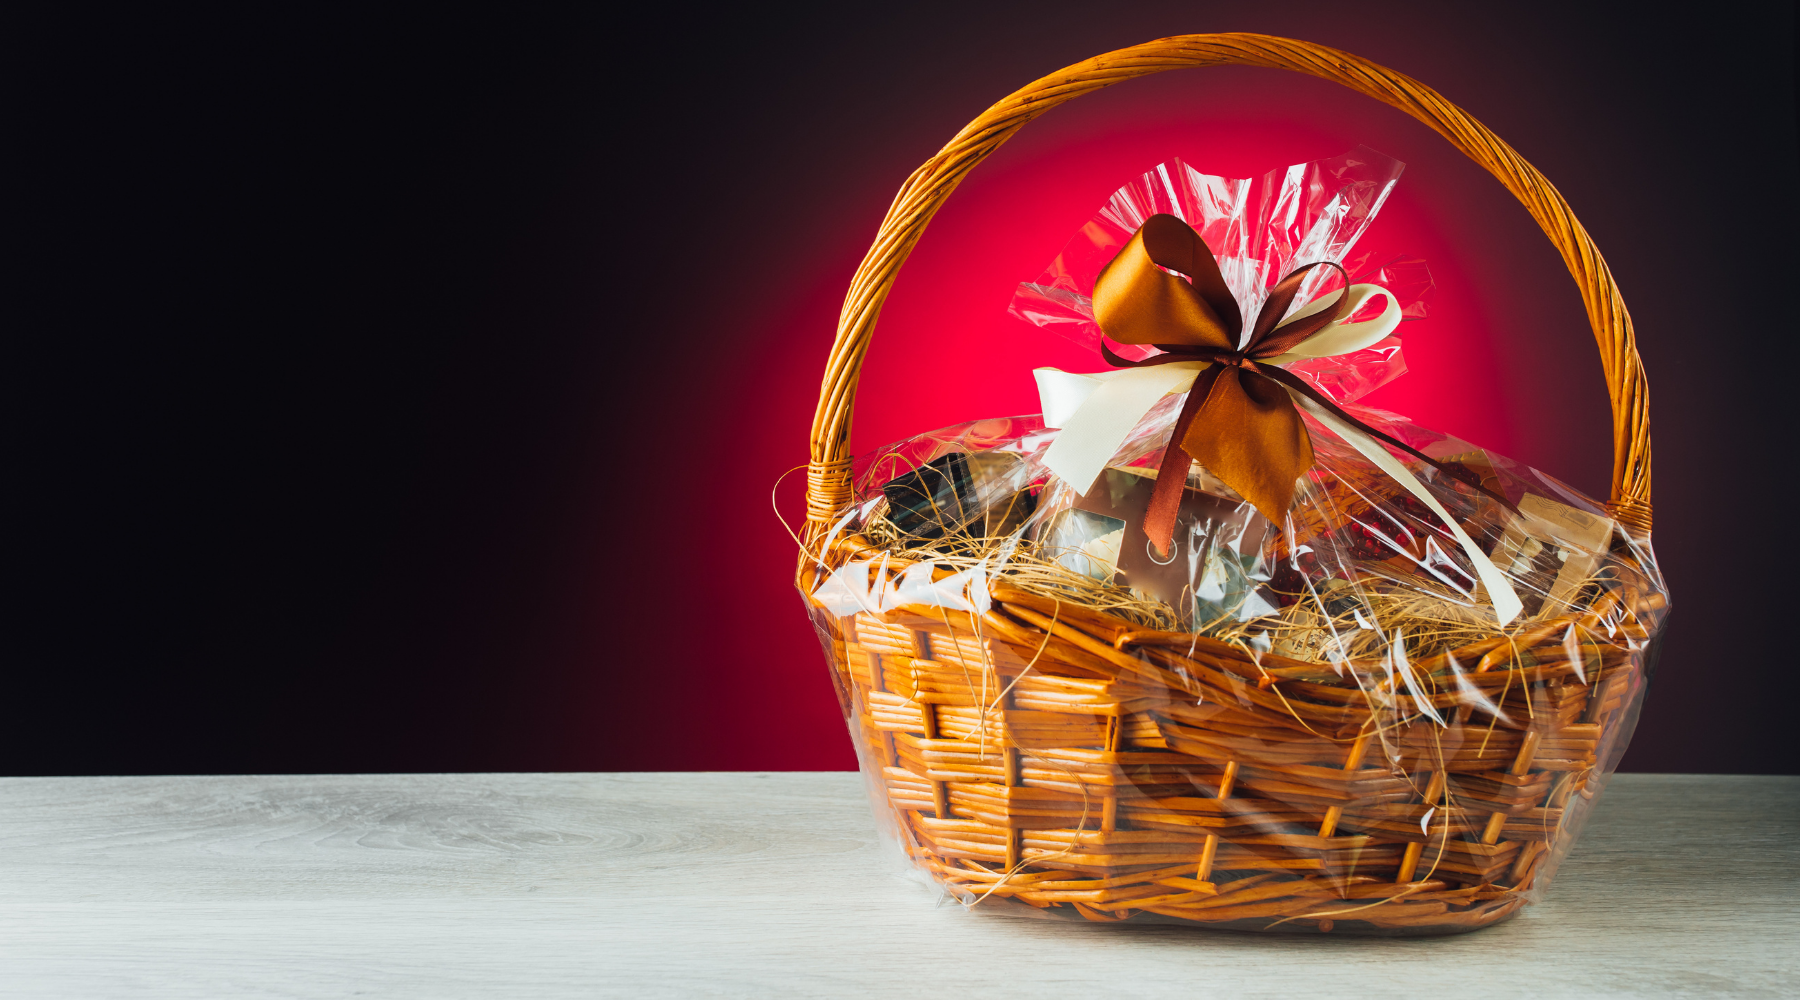 Shopping for someone on a ketogenic diet plan? A Holiday gift basket filled with keto friendly items is a great gift idea (and it's perfect for birthdays, anniversaries and other occasions).